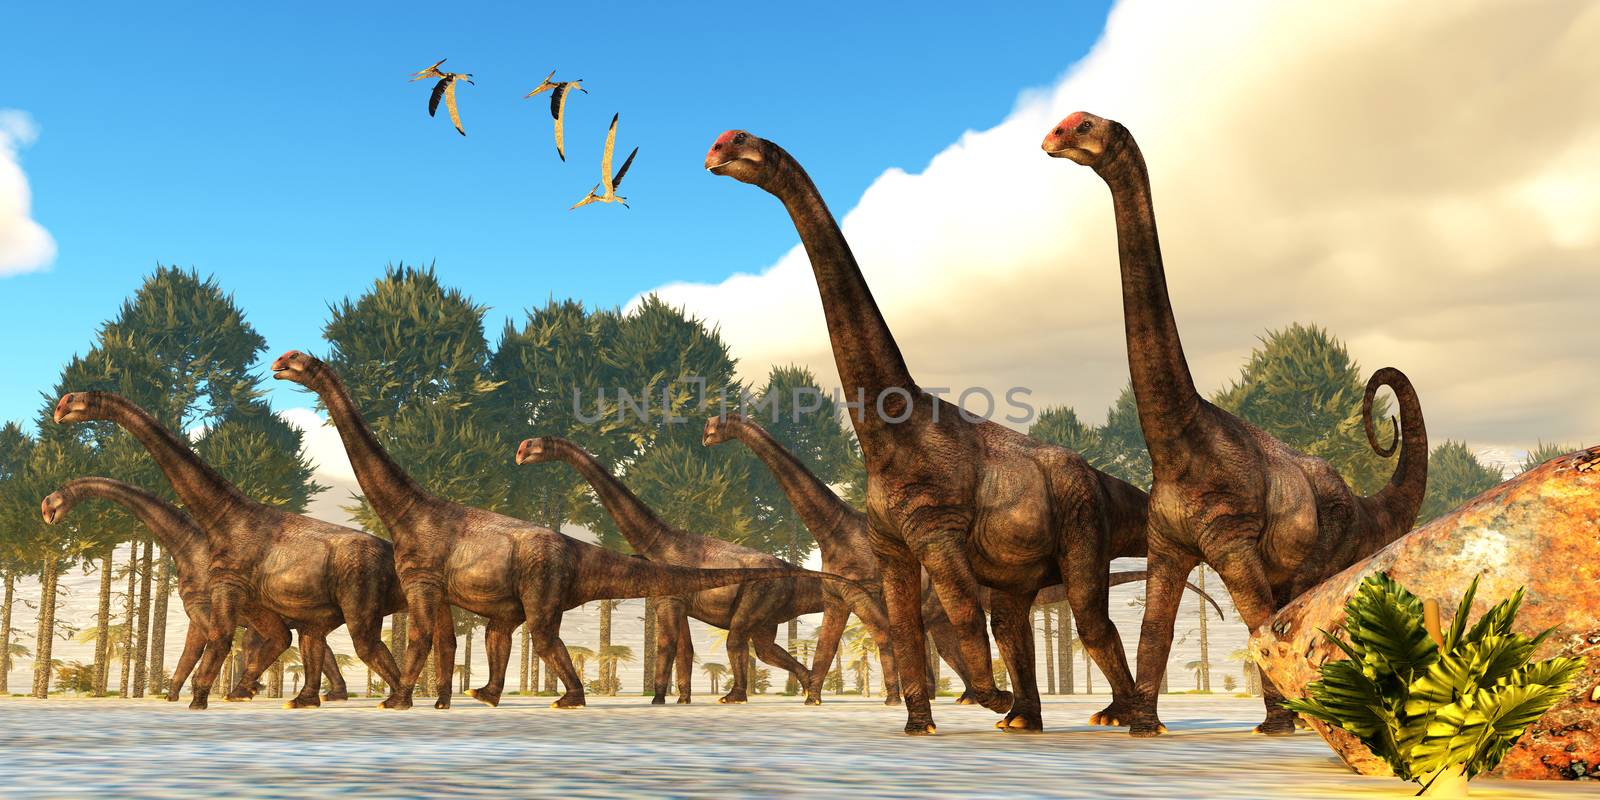 A flock of Pteranodon reptiles fly over a herd of Brontomerus dinosaurs during the Cretaceous Period.